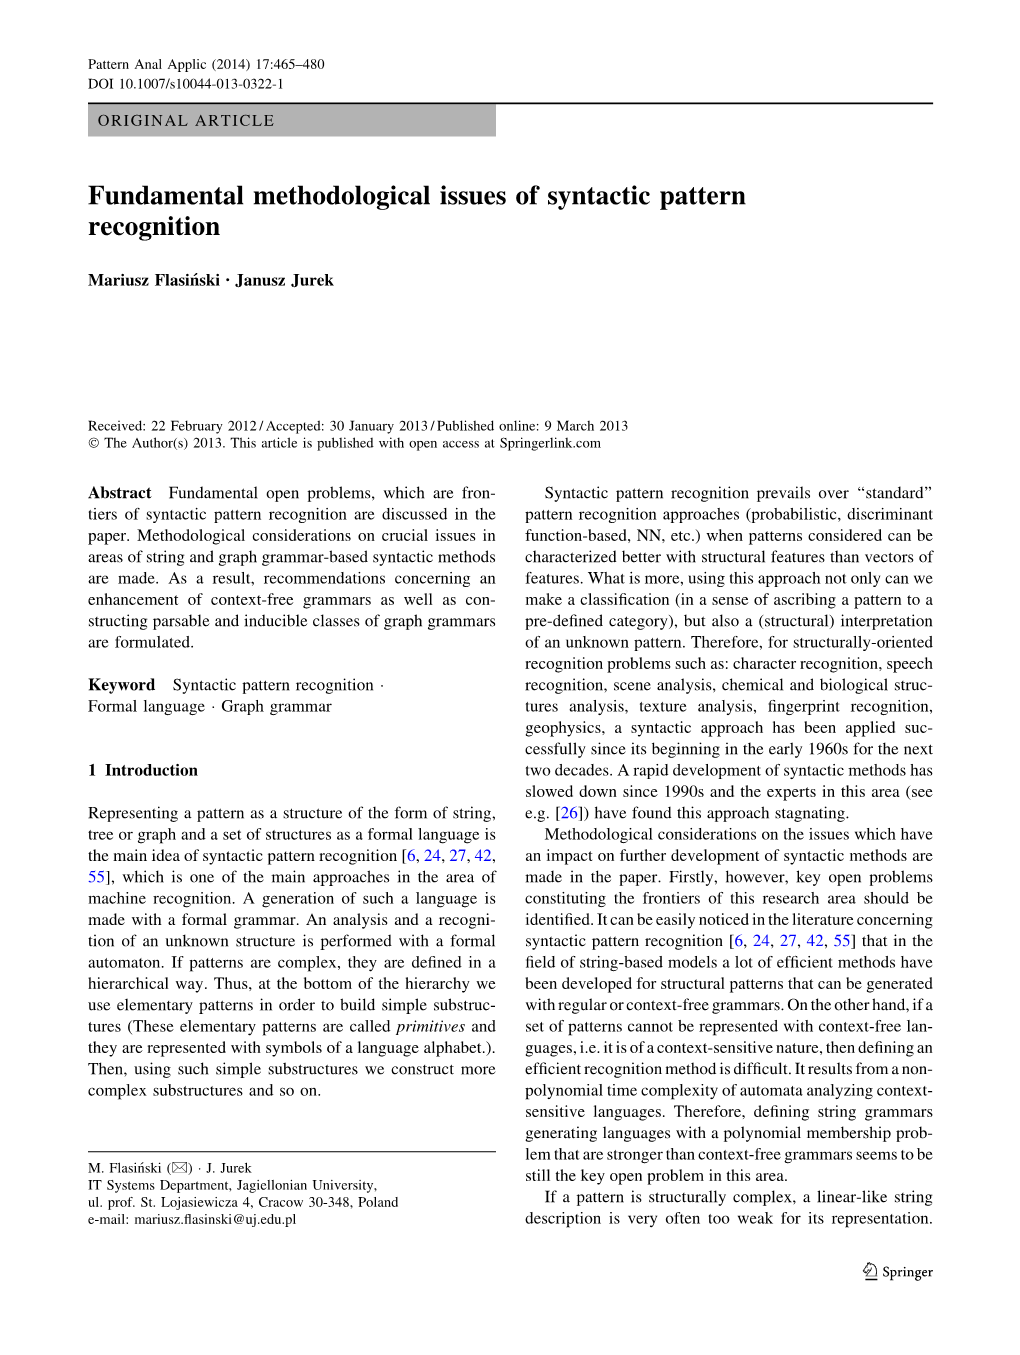 Fundamental Methodological Issues of Syntactic Pattern Recognition